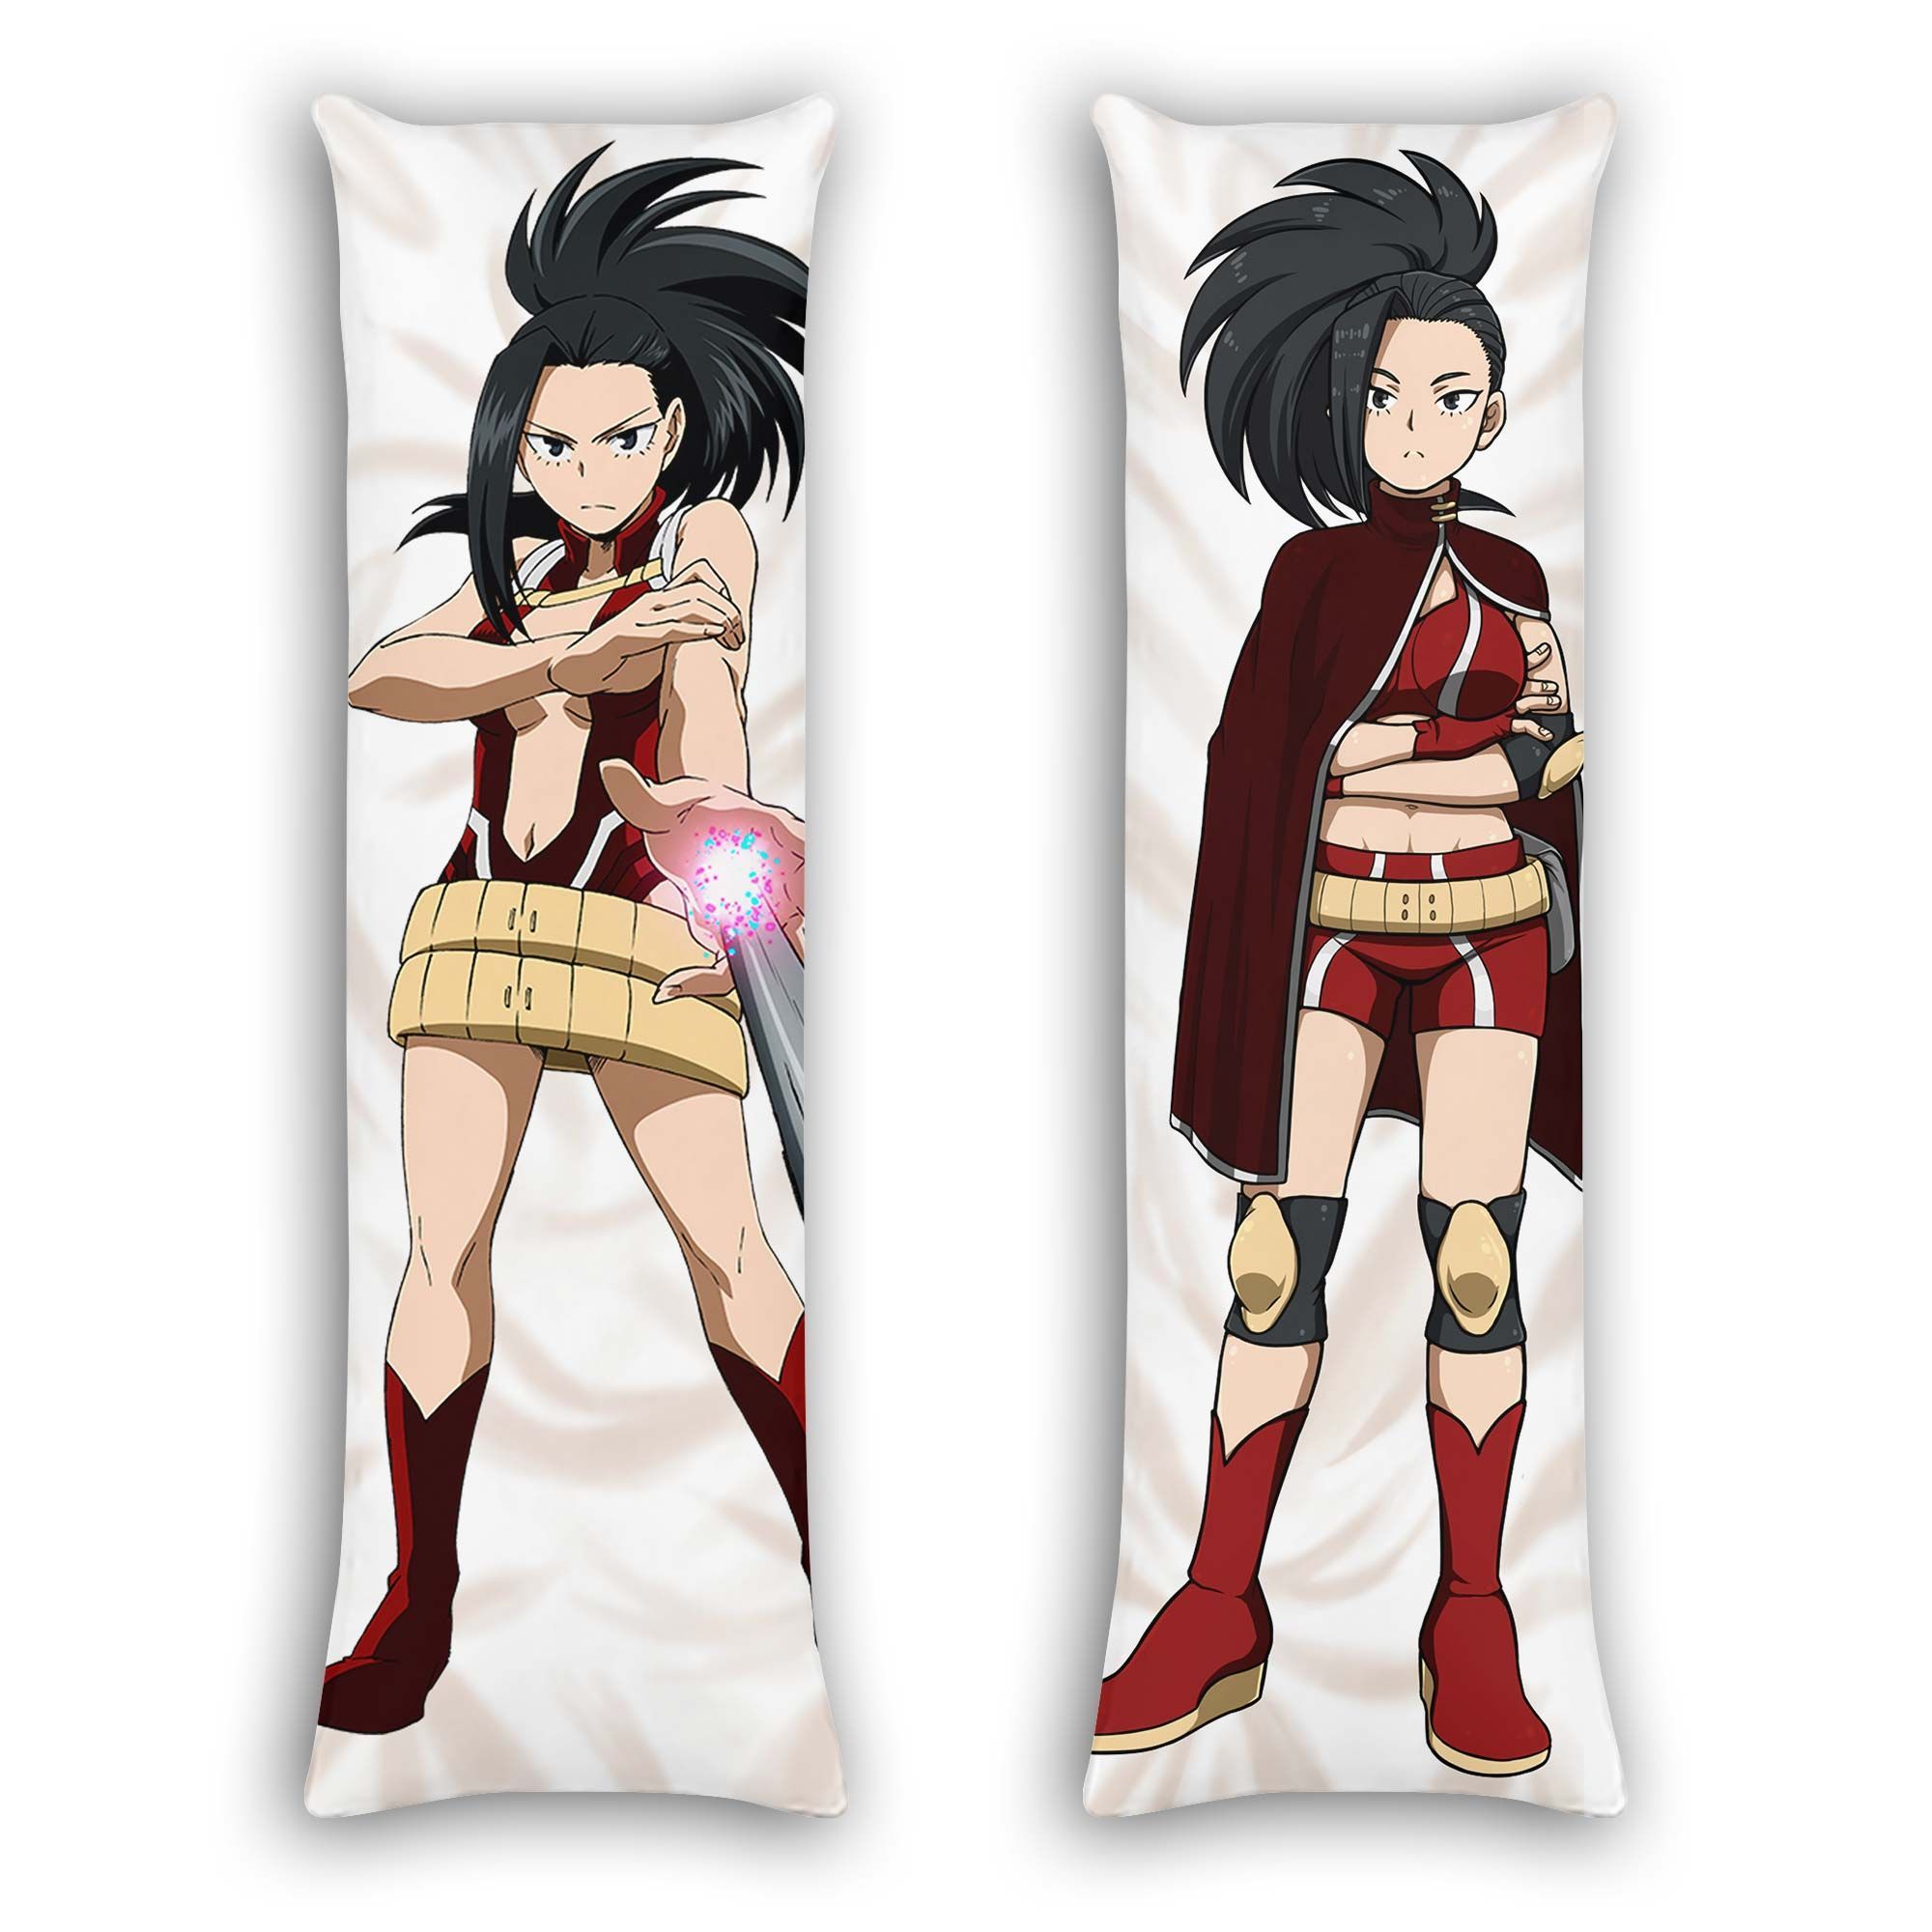 MHA Momo Yaoyorozu Body Pillow Cover and Inserts Awesome body pillow for an...